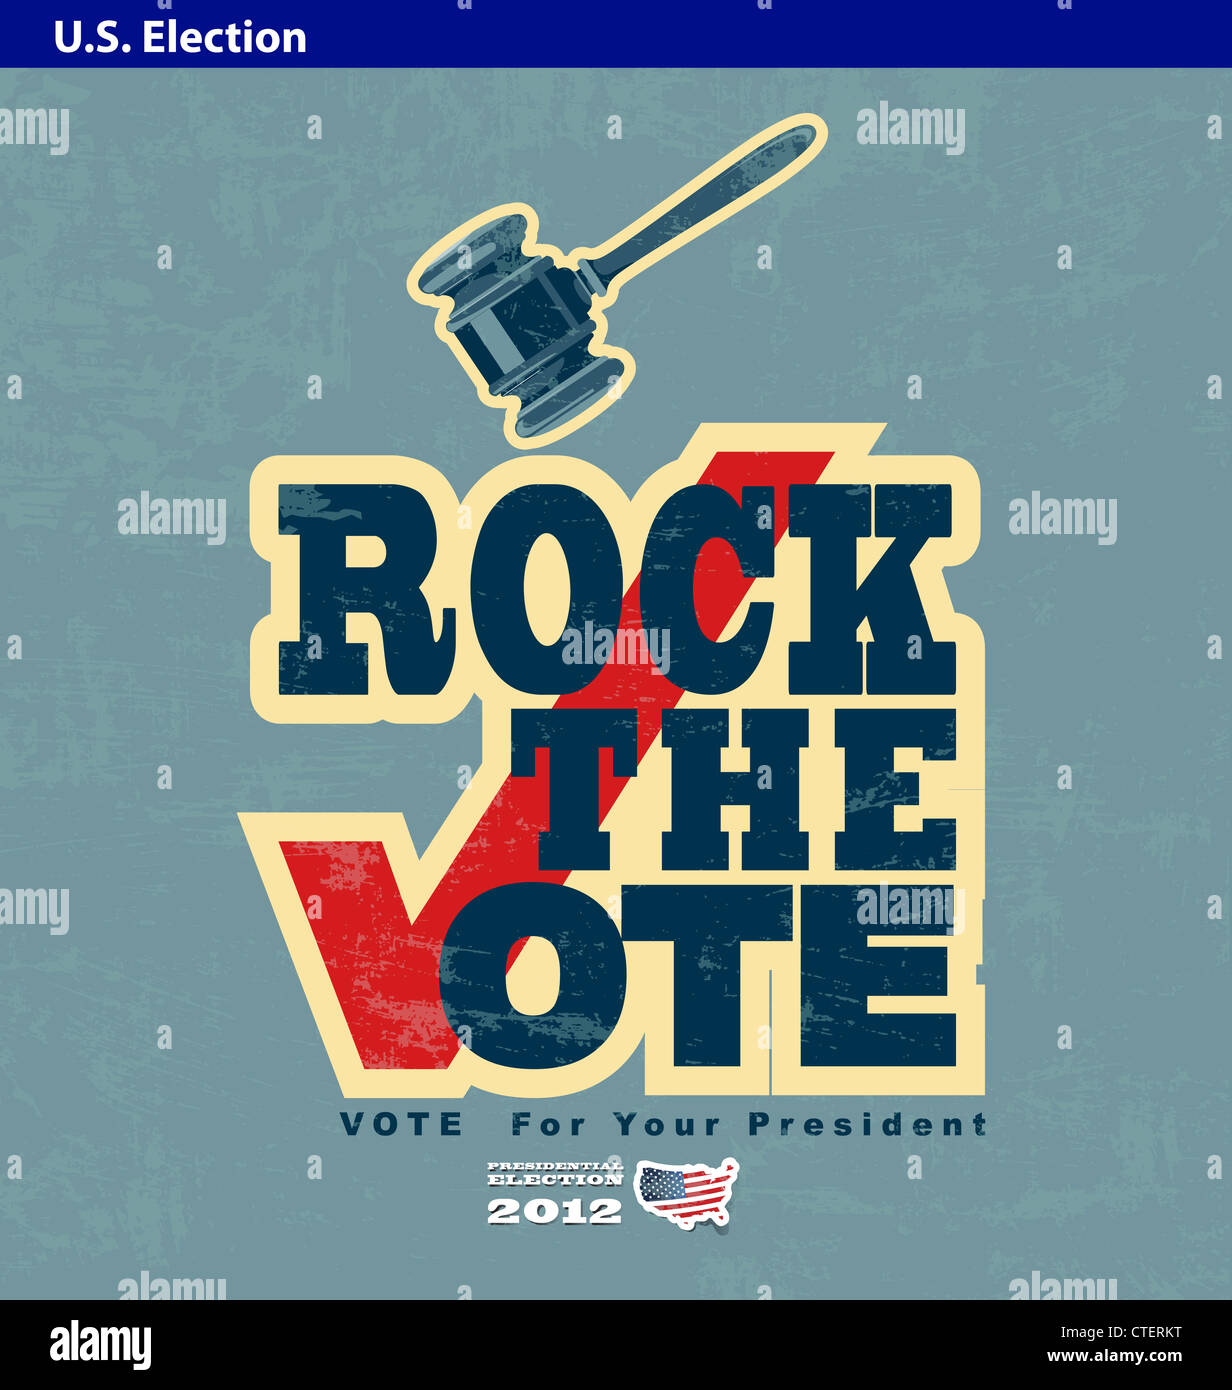 US presidential 2012 election rock the vote poster Stock Photo